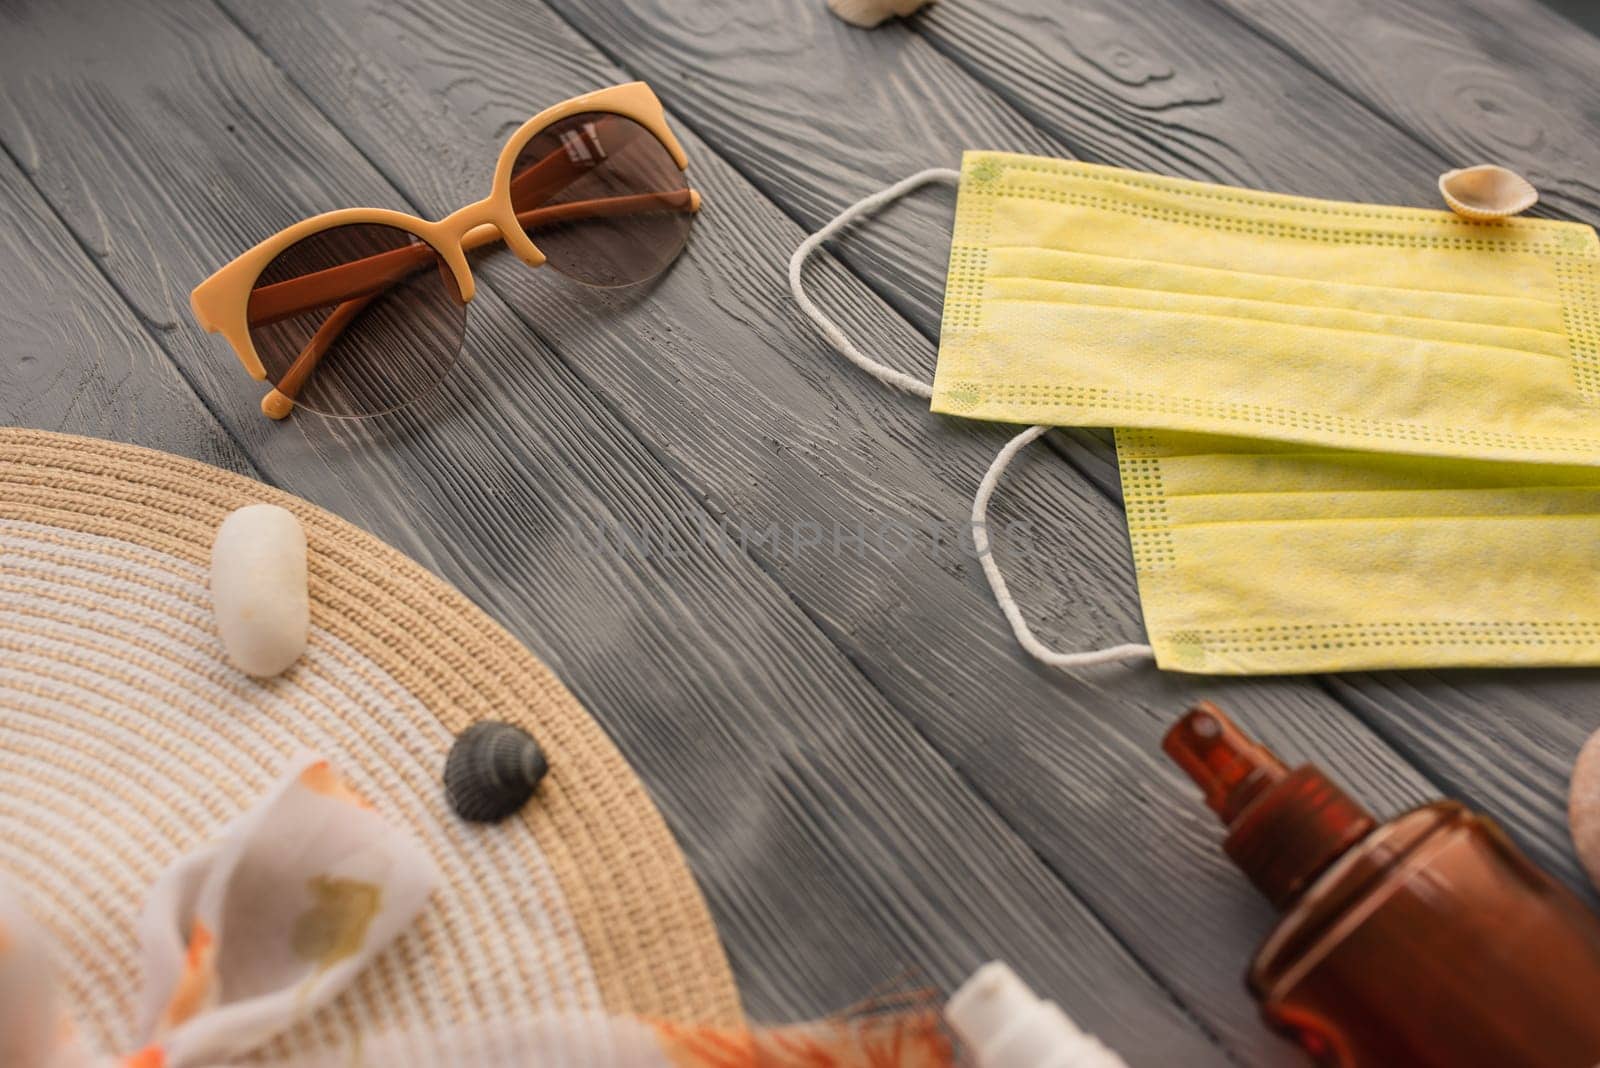 New normal covid face mask hat bag sun protection sunglasses sunscreen spray lotion tan ultra-violet rays. Summer background template mockup free space pattern composition sample text. Top view above